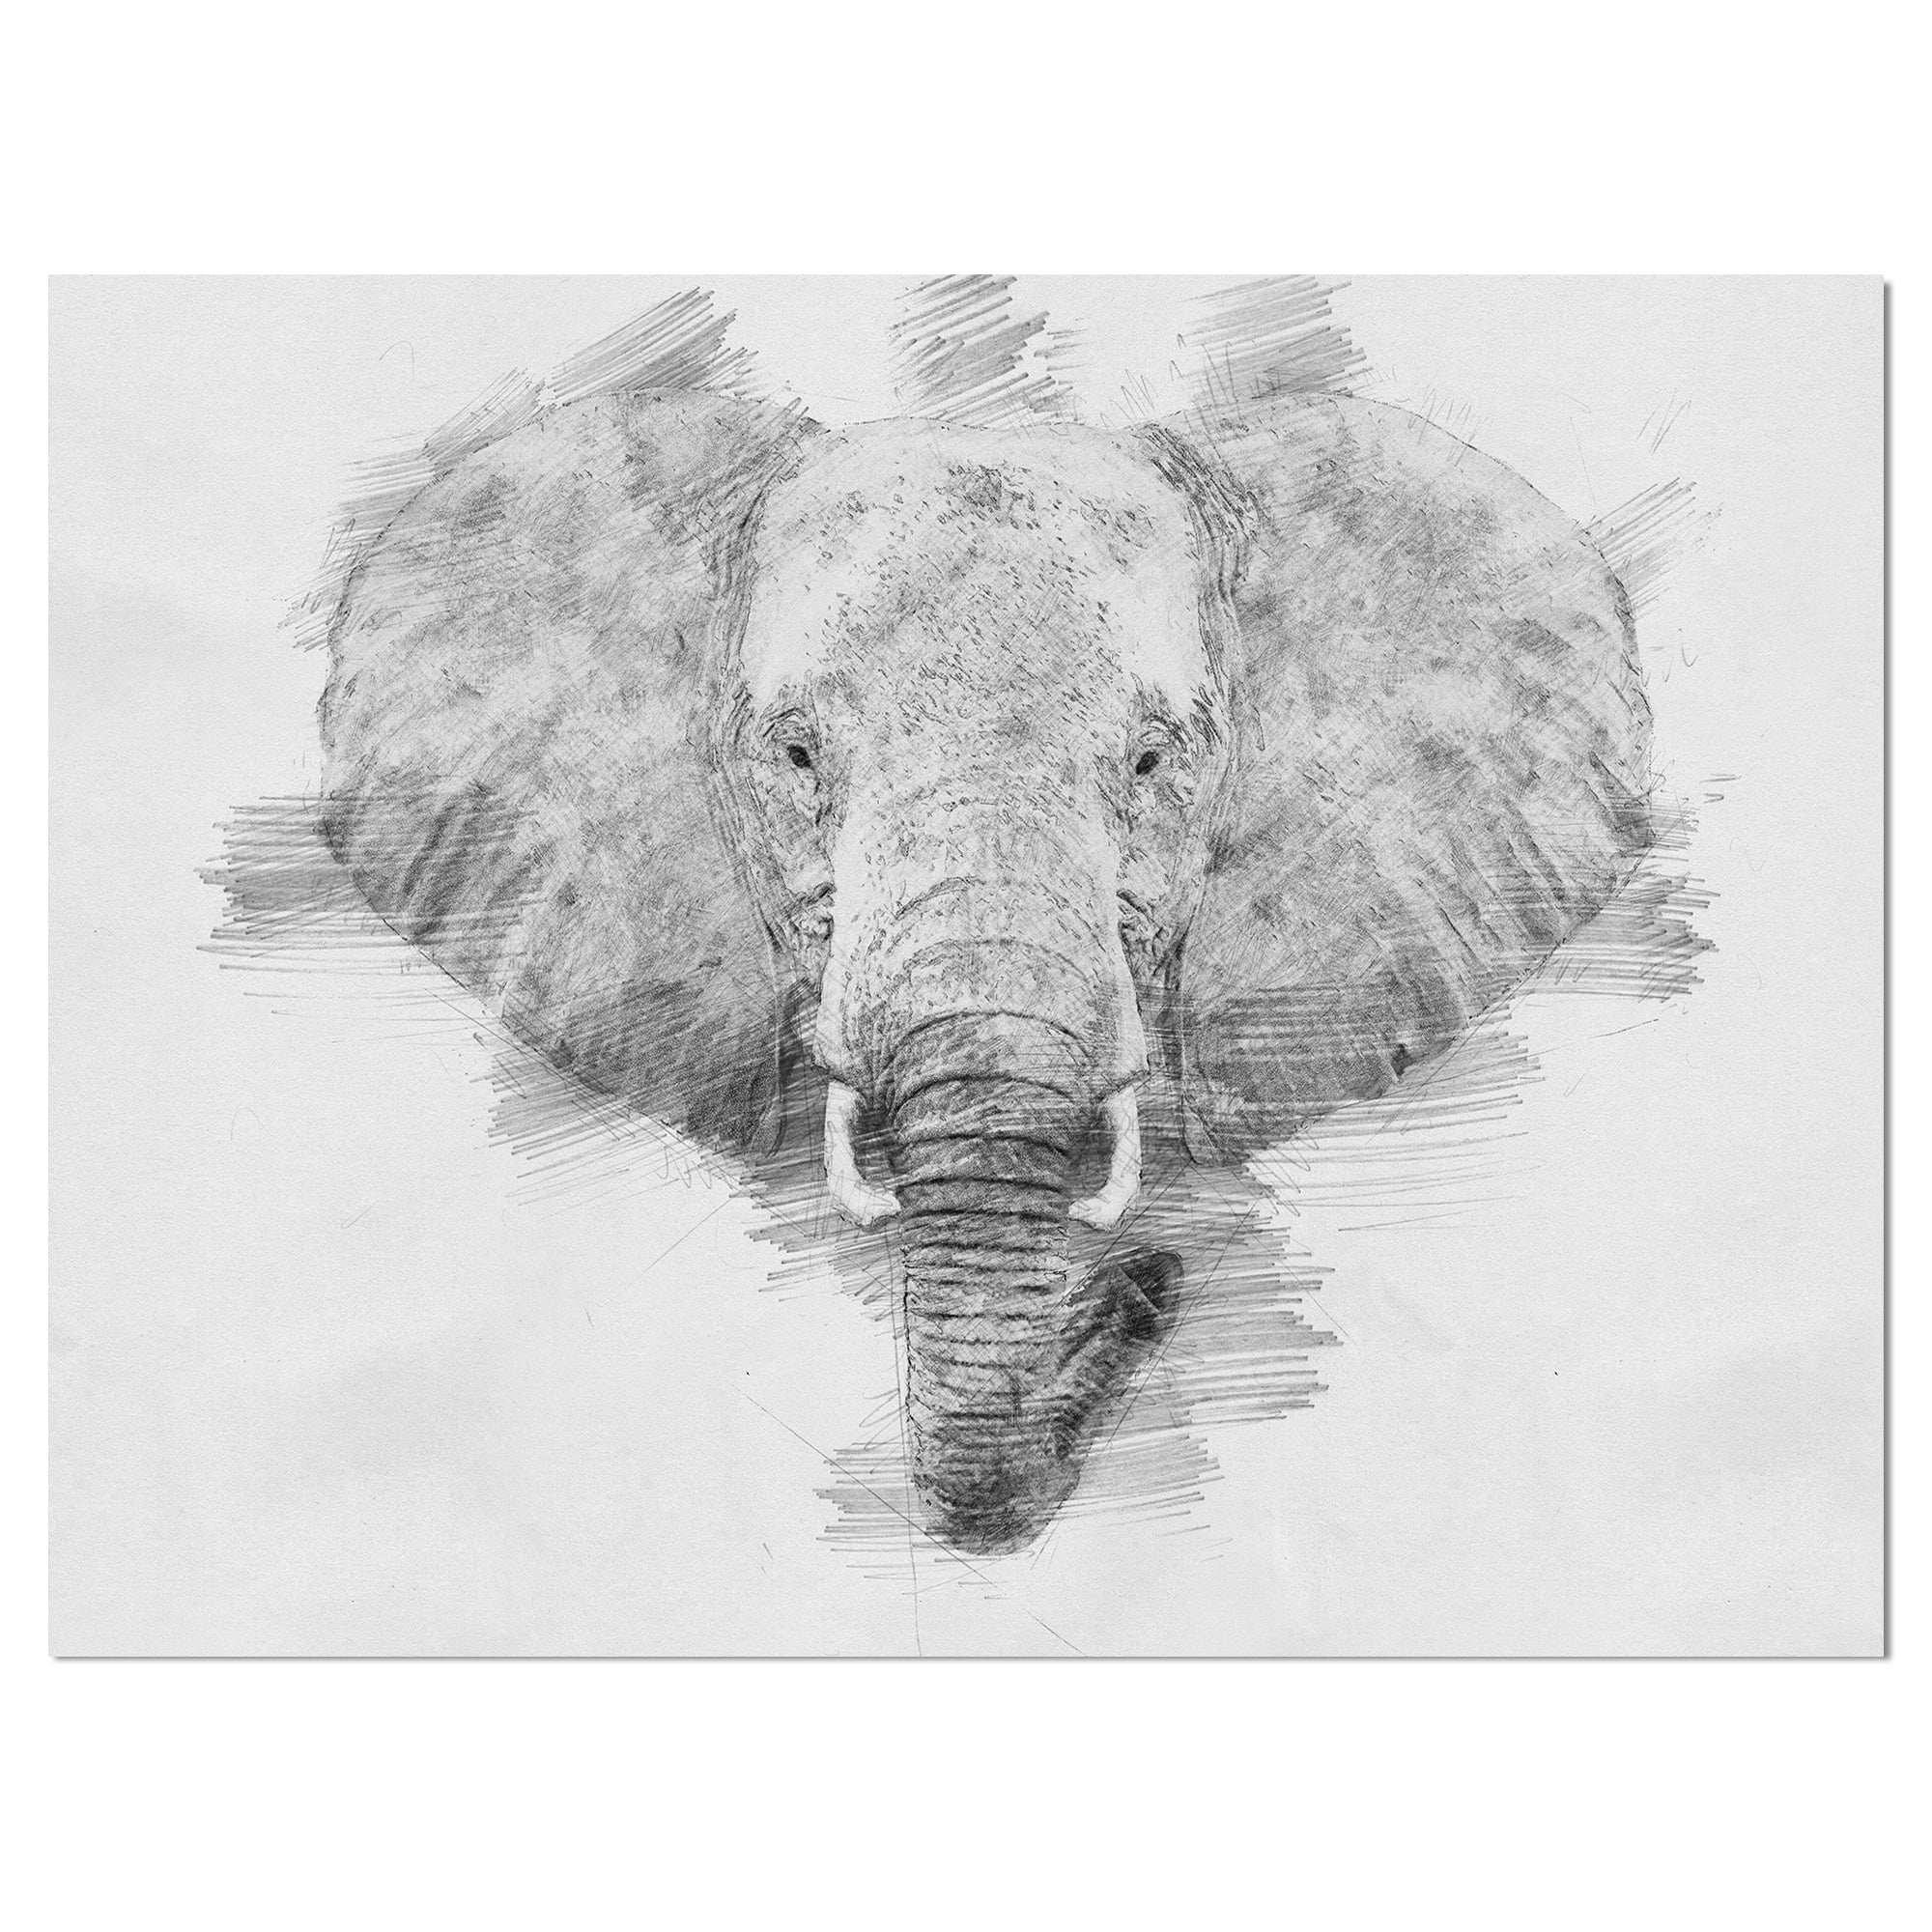 DESIGN ART Designart 'Elephant in Pencil Sketch' Sketch Animals Print on  Wrapped Canvas - Grey 12 in. wide x 8 in. high 